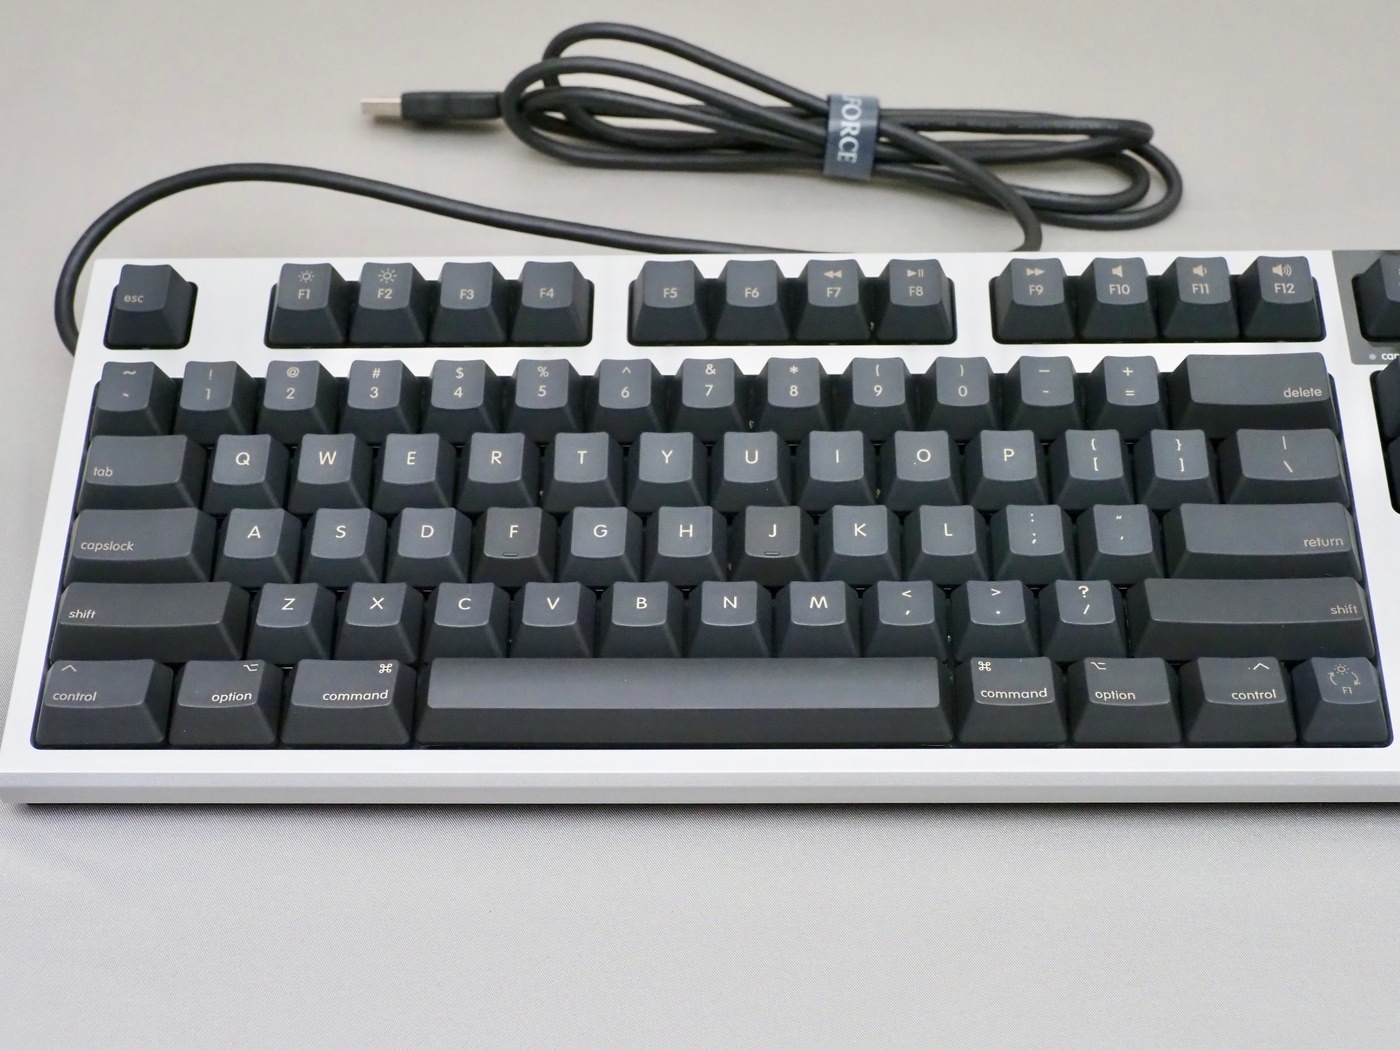 realforce-tkl-for-mac-pfu-limited-edition-review_00027